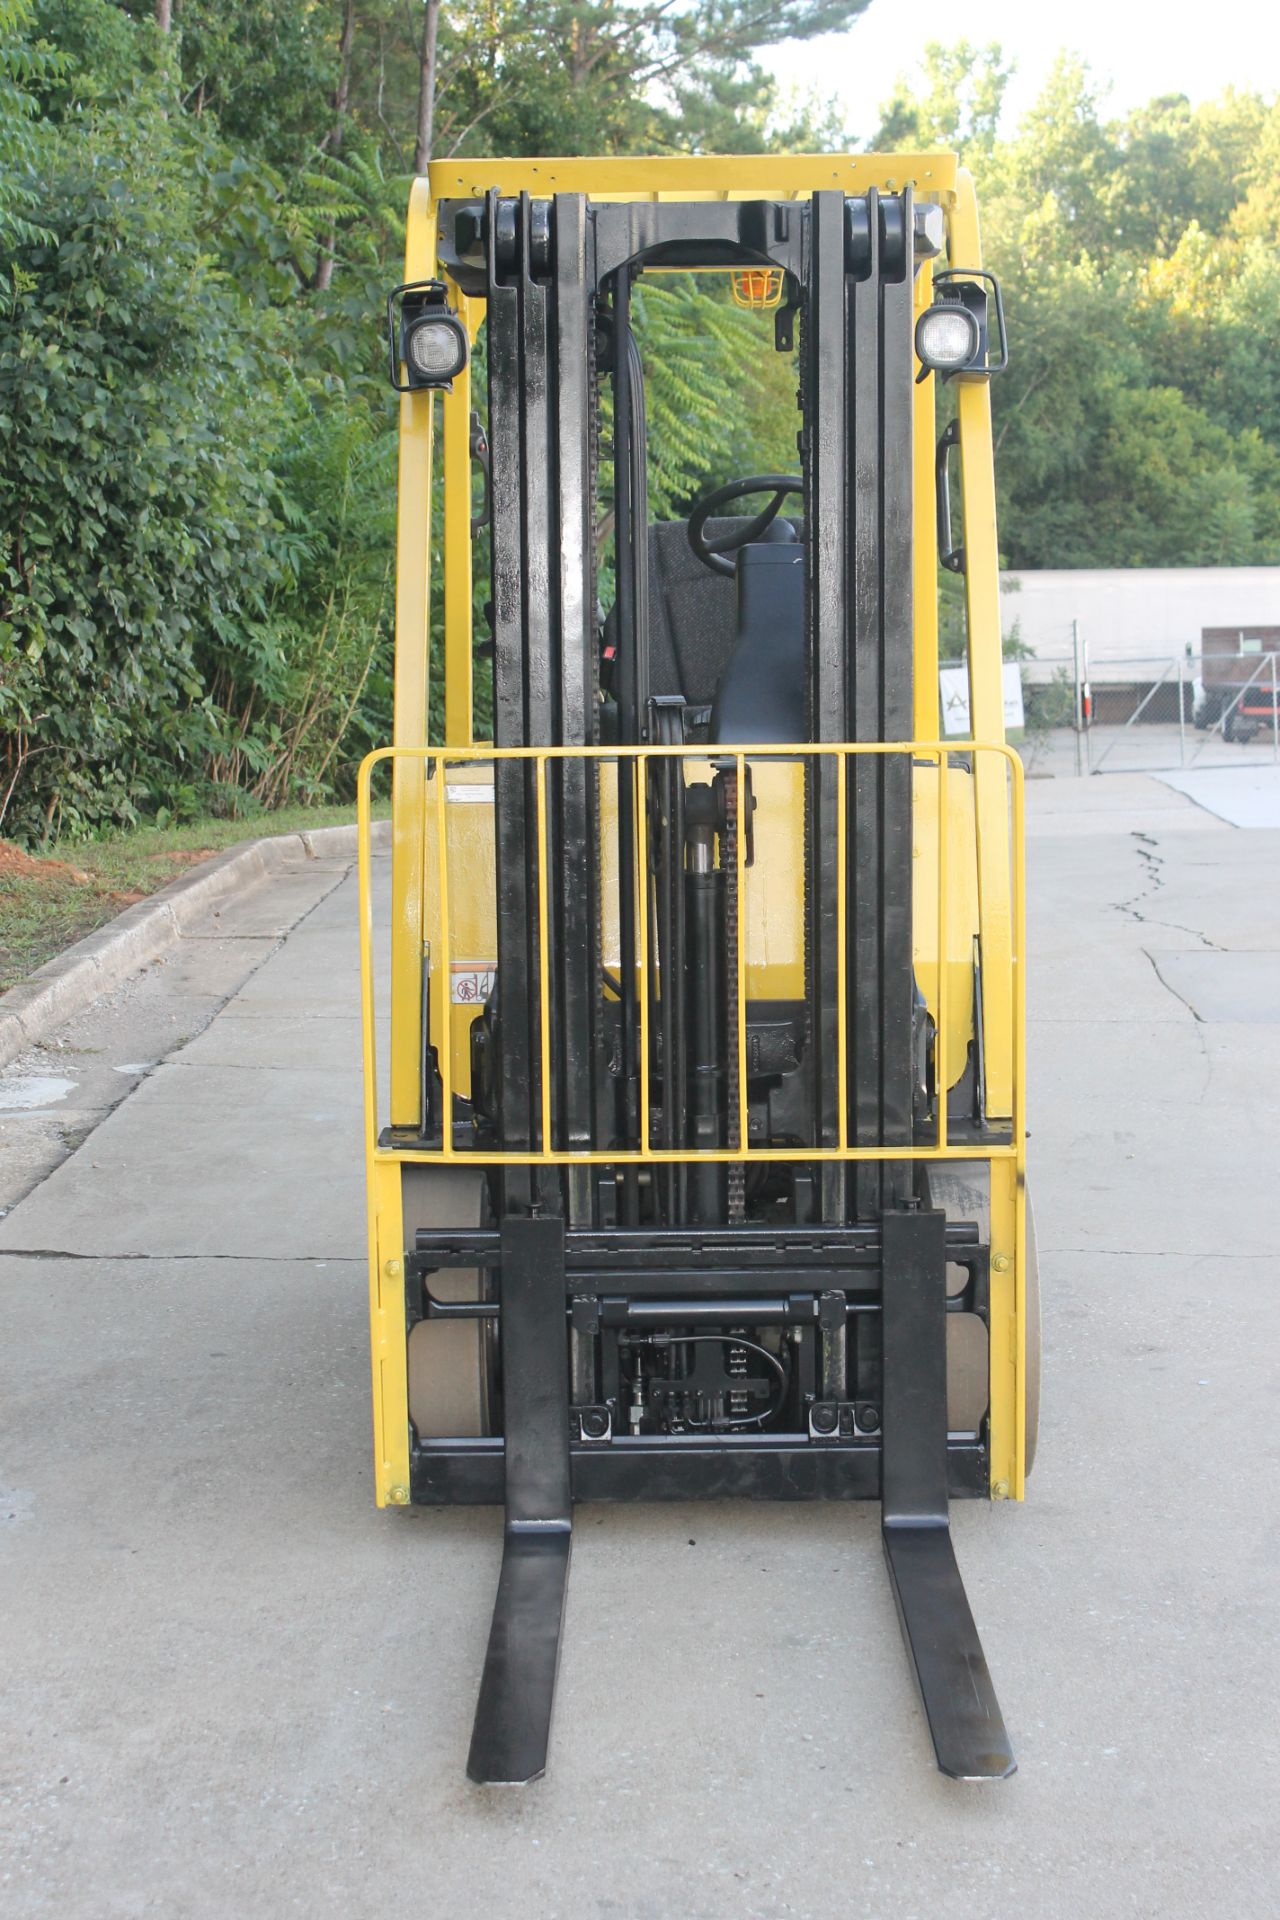 2012 HYSTER 5000 LBS. CAPACITY ELECTRIC FORKLIFT WITH 48 VOLTS BATTERY CHARGER, CLICK TO WATCH VIDEO - Image 8 of 9